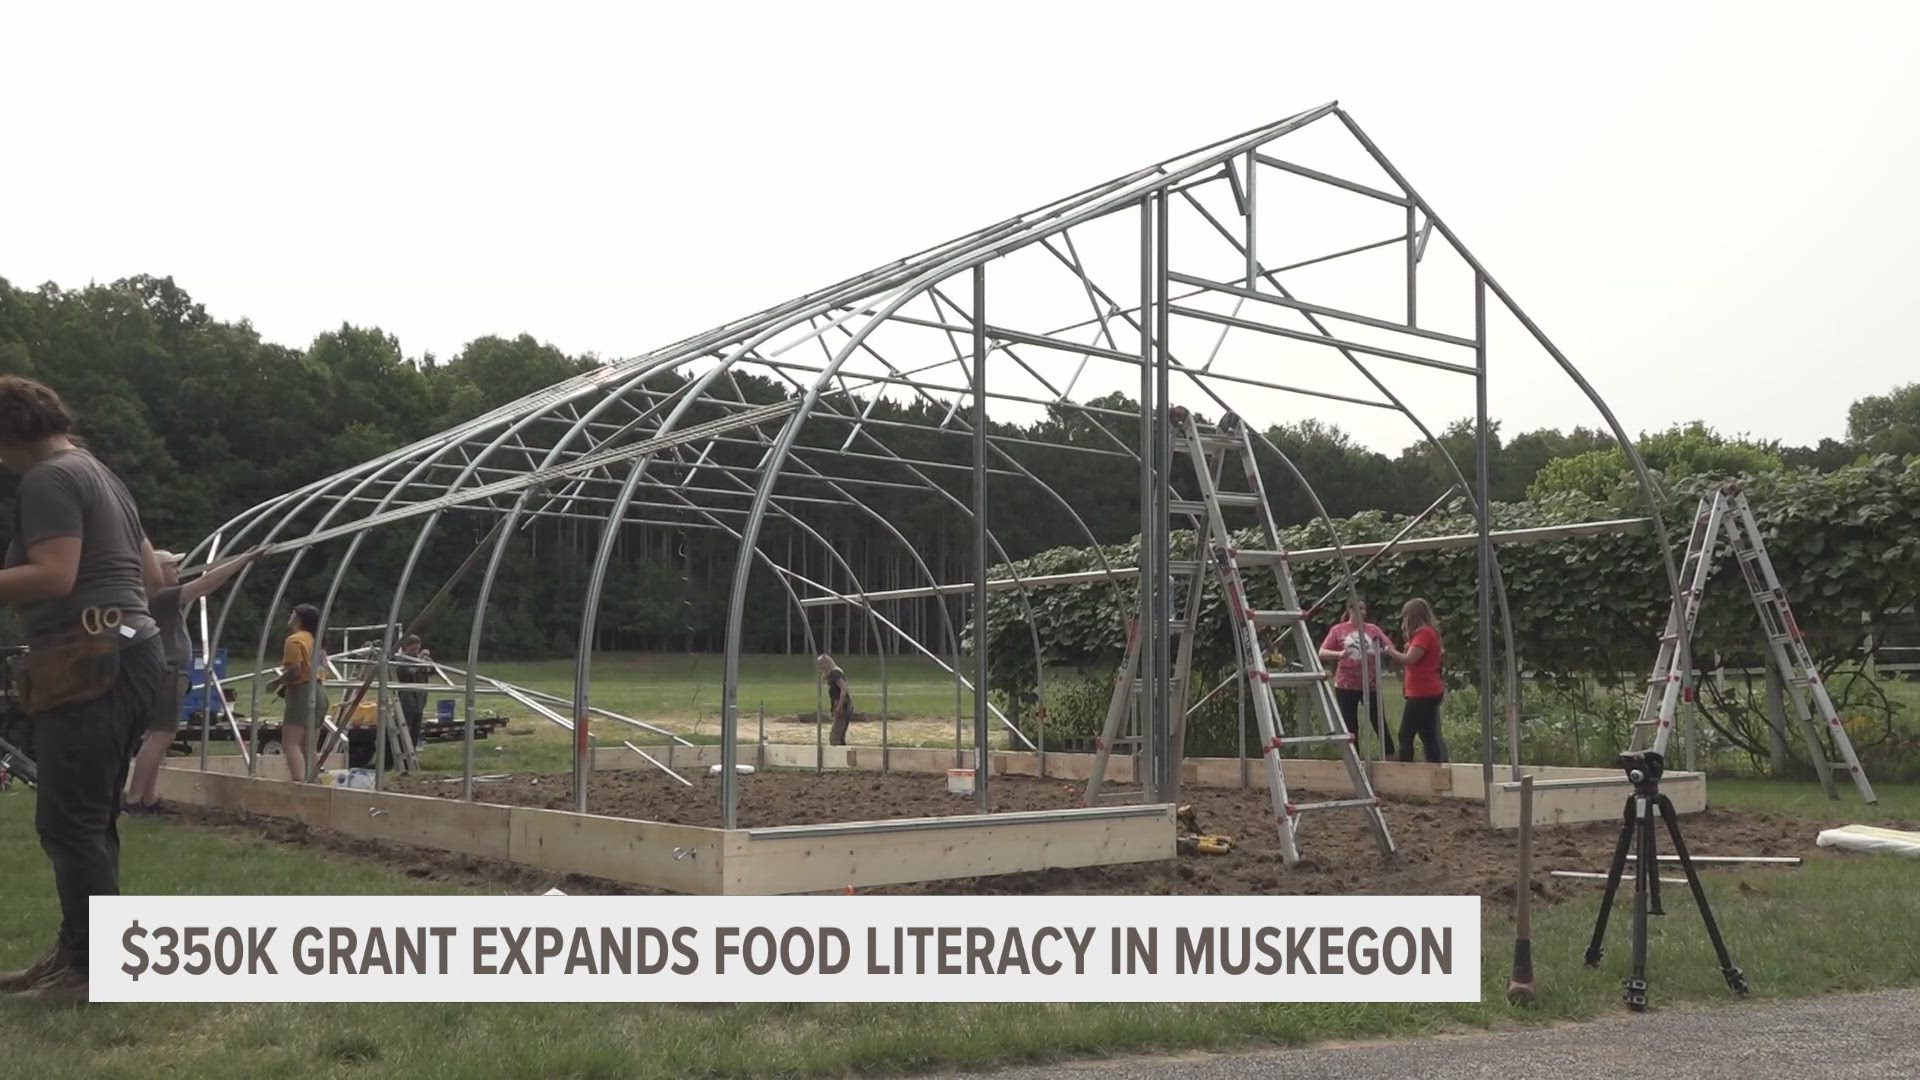 School districts in Muskegon County are getting thousands of dollars to teach kids about healthy eating, with one school building its own gardening hoophouse.